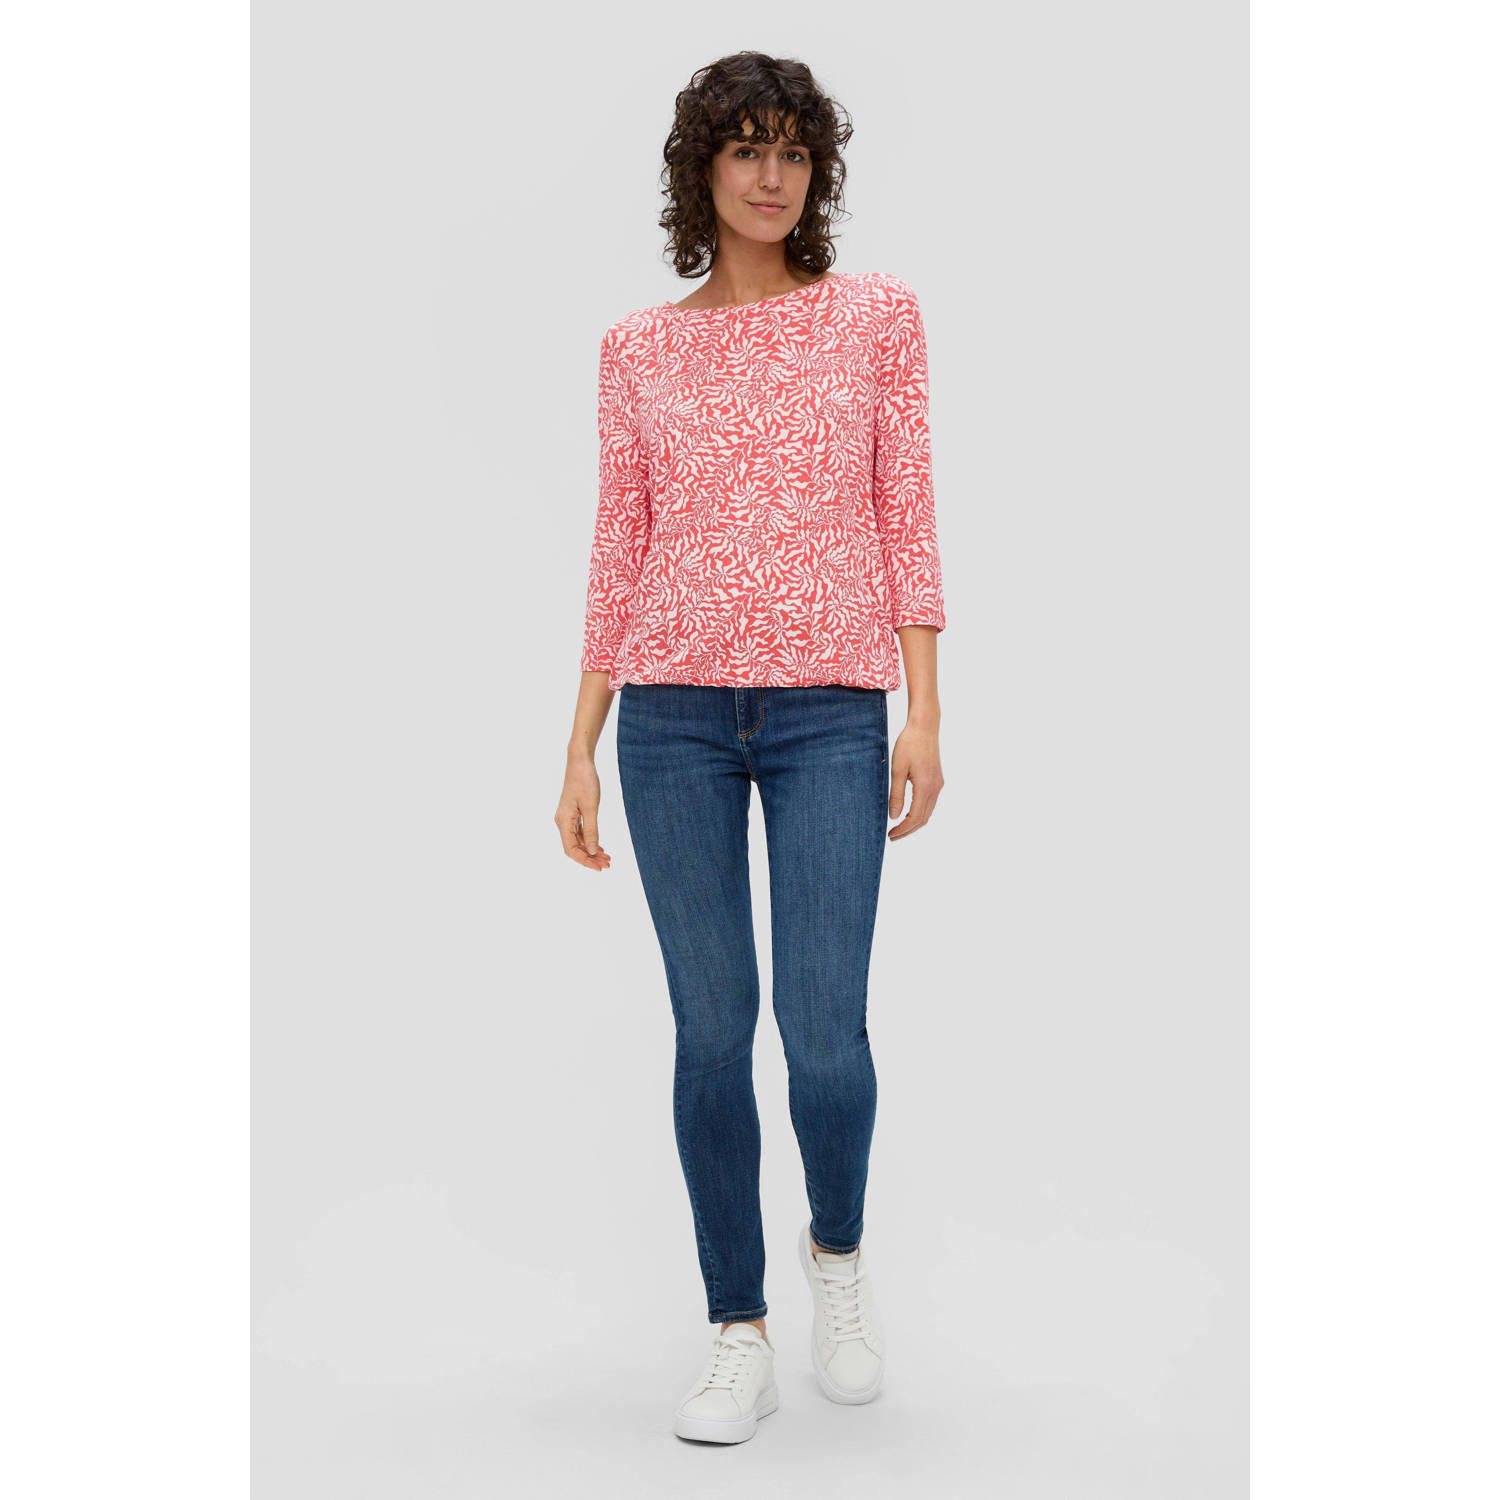 s.Oliver top met all over print rood